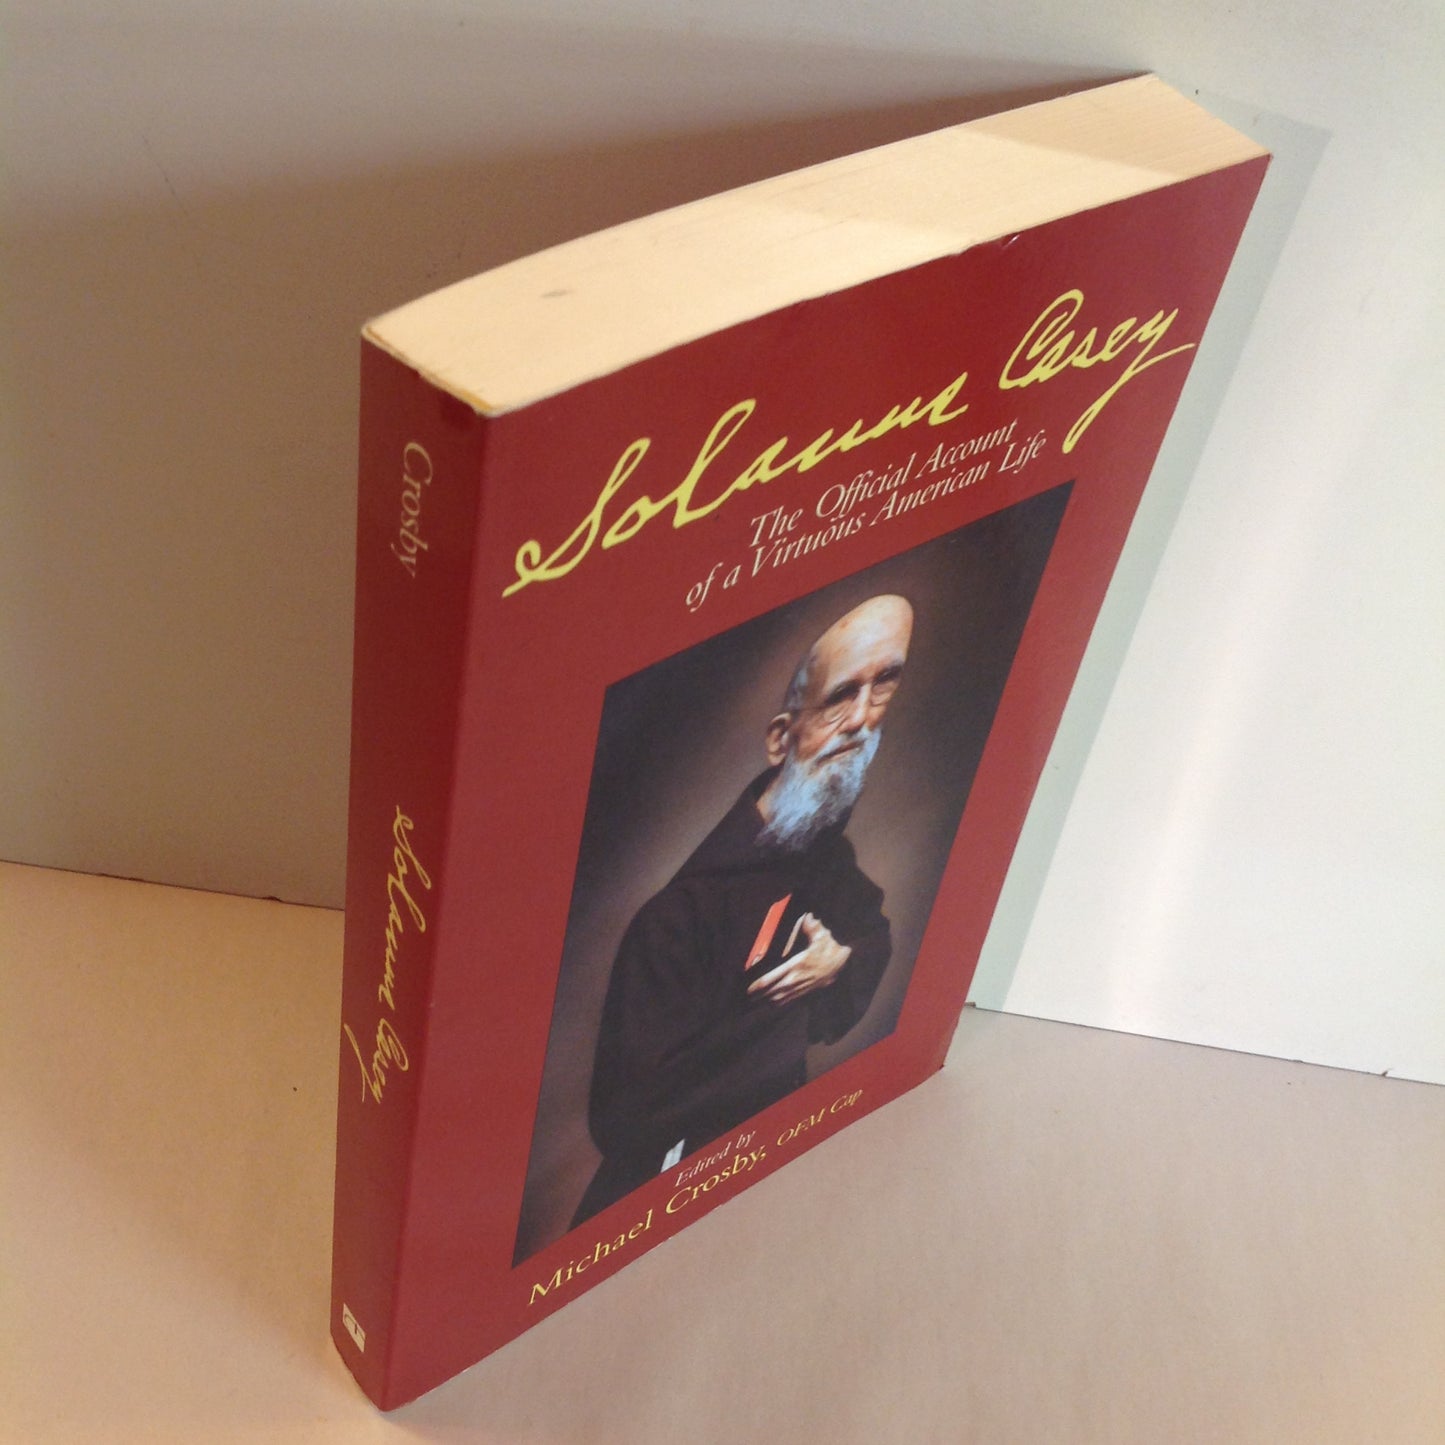 Vintage 2000 Trade Paperback Solanus Casey: The Official Account of a Virtuous American Life Michael Crosby, Ed